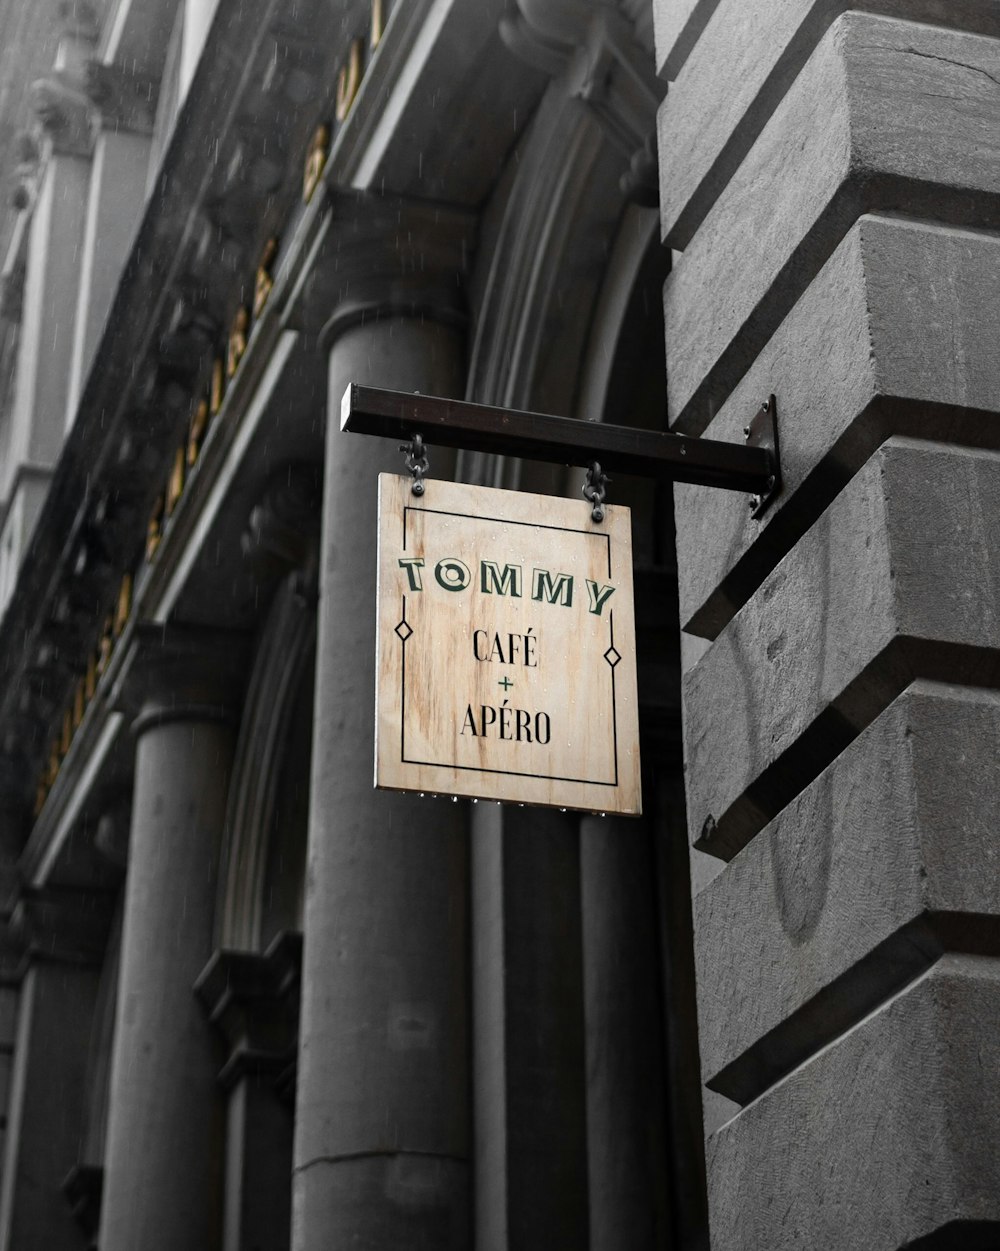 Tommy Cafe Apero signboard